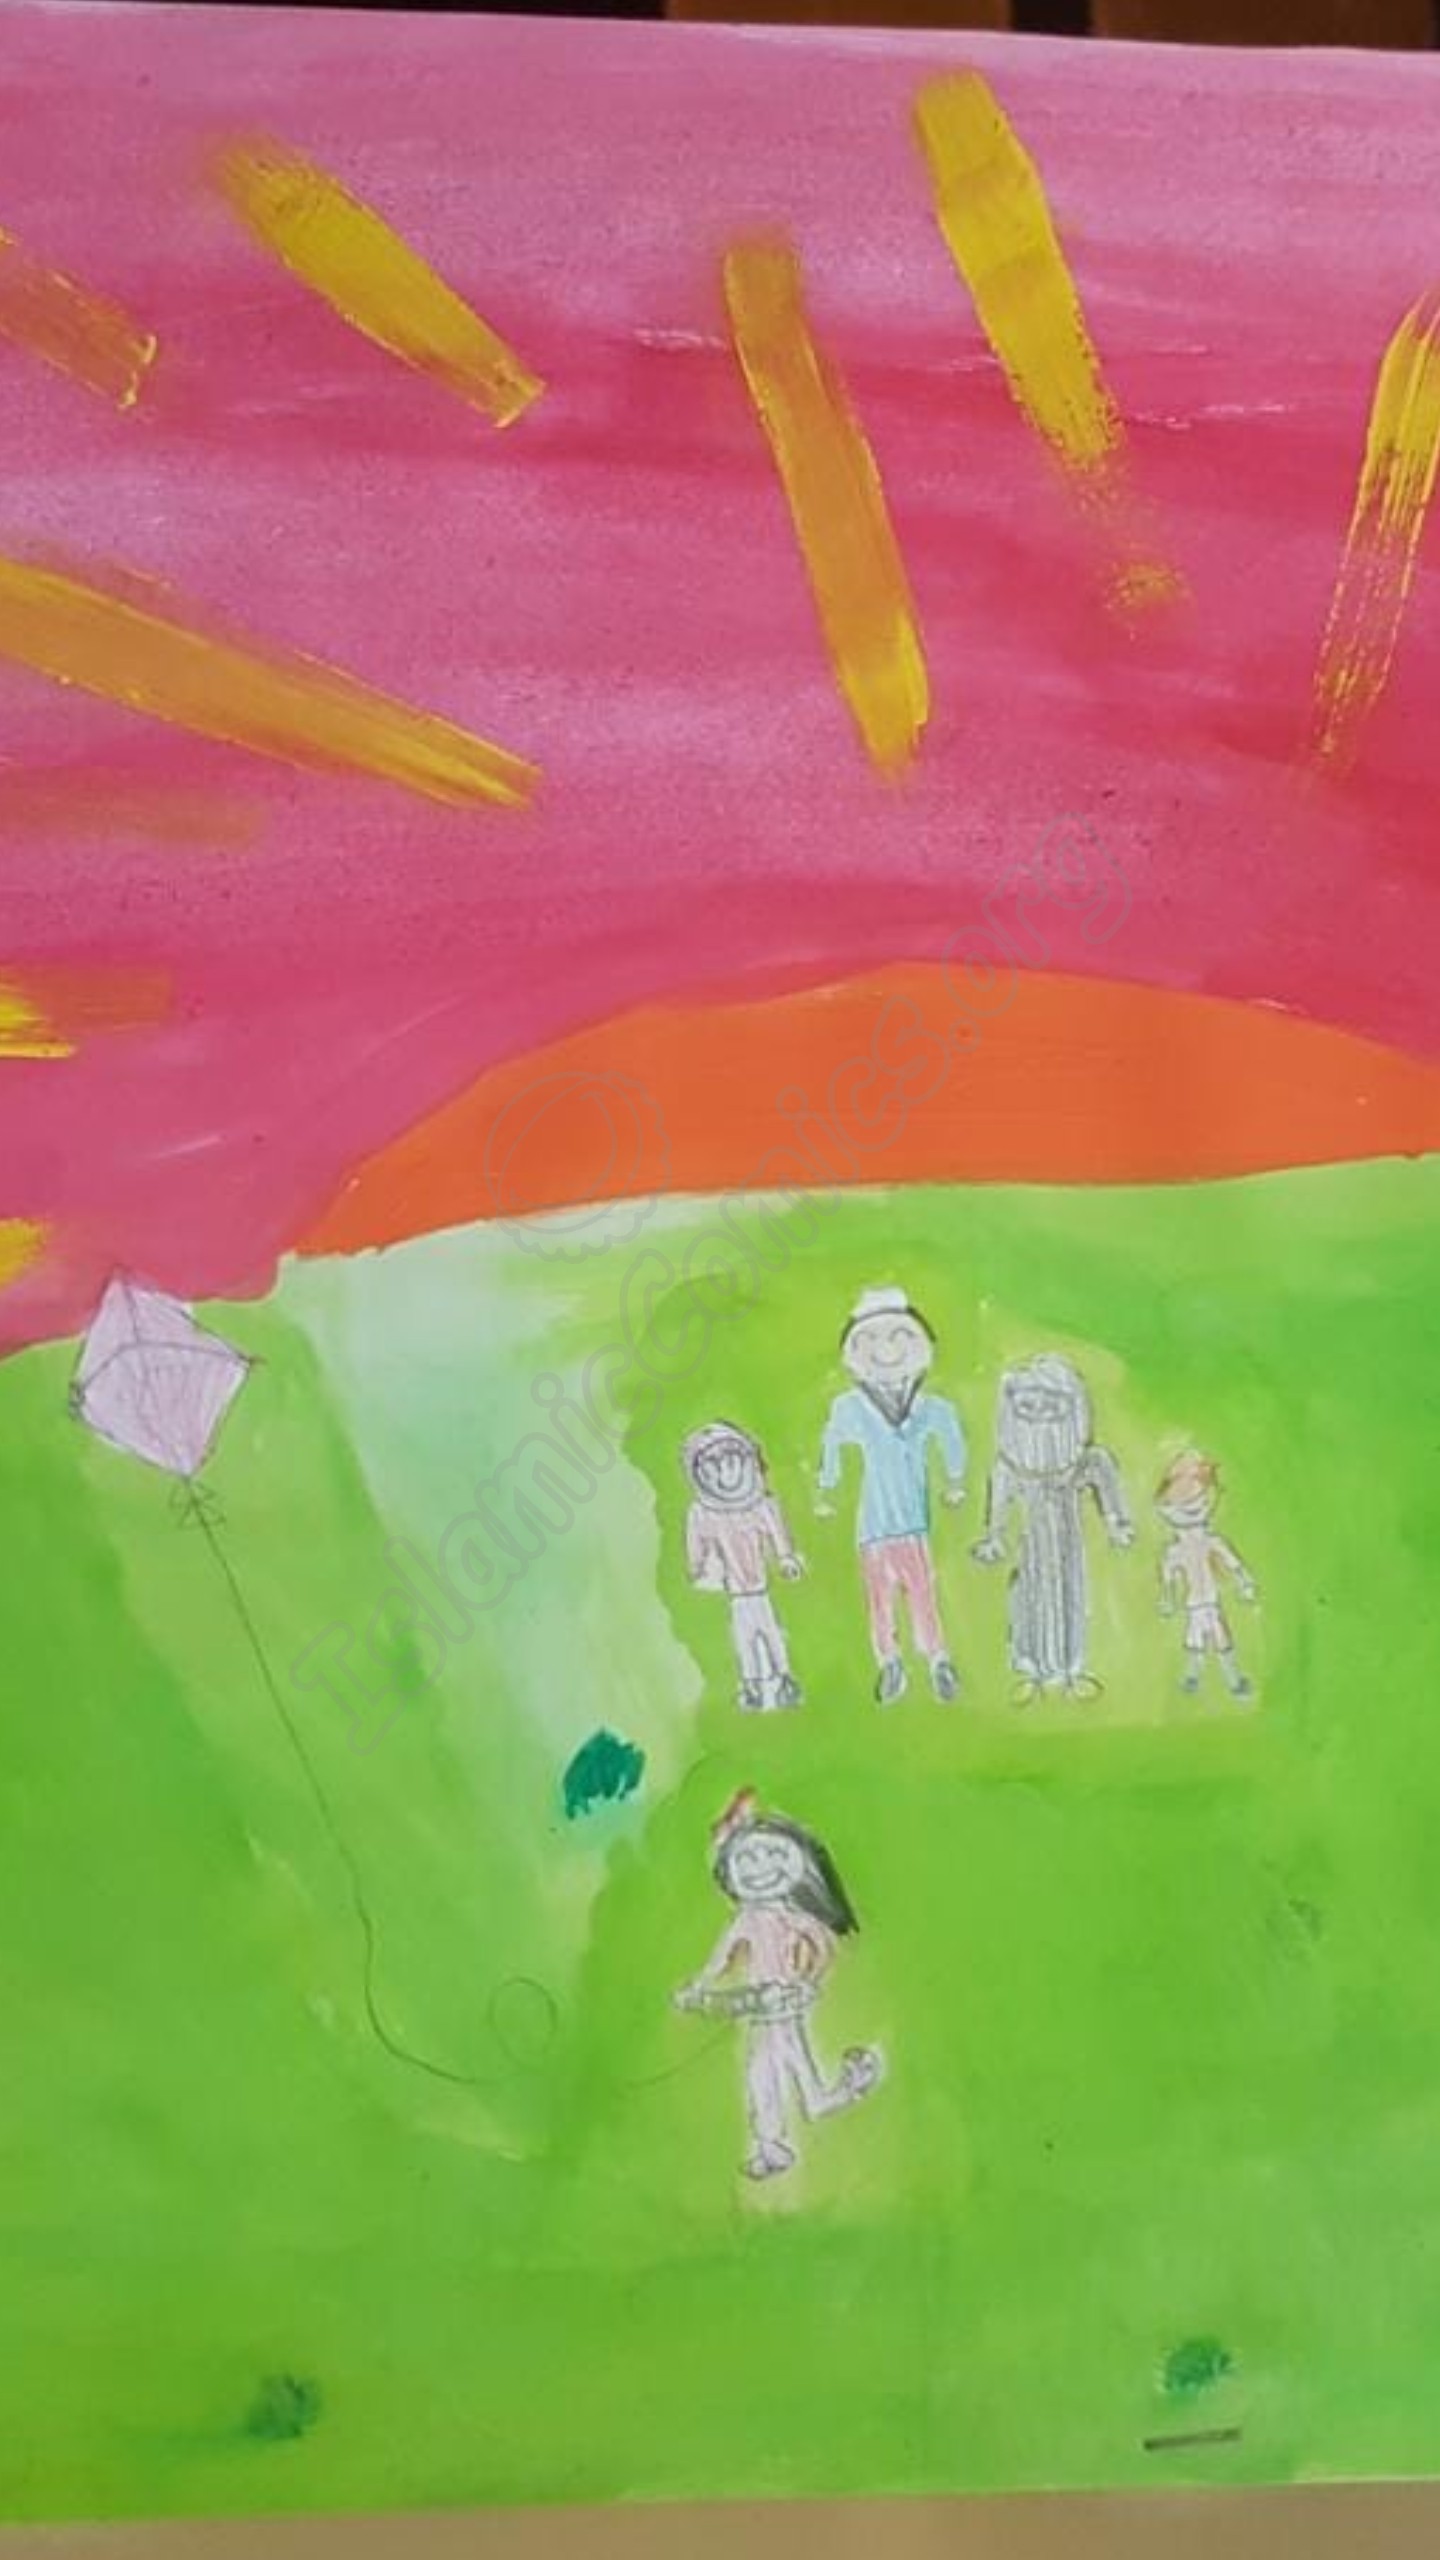 Day Out with My Family - Hana Abdus Samad (Illustrations by Muslim Kids)